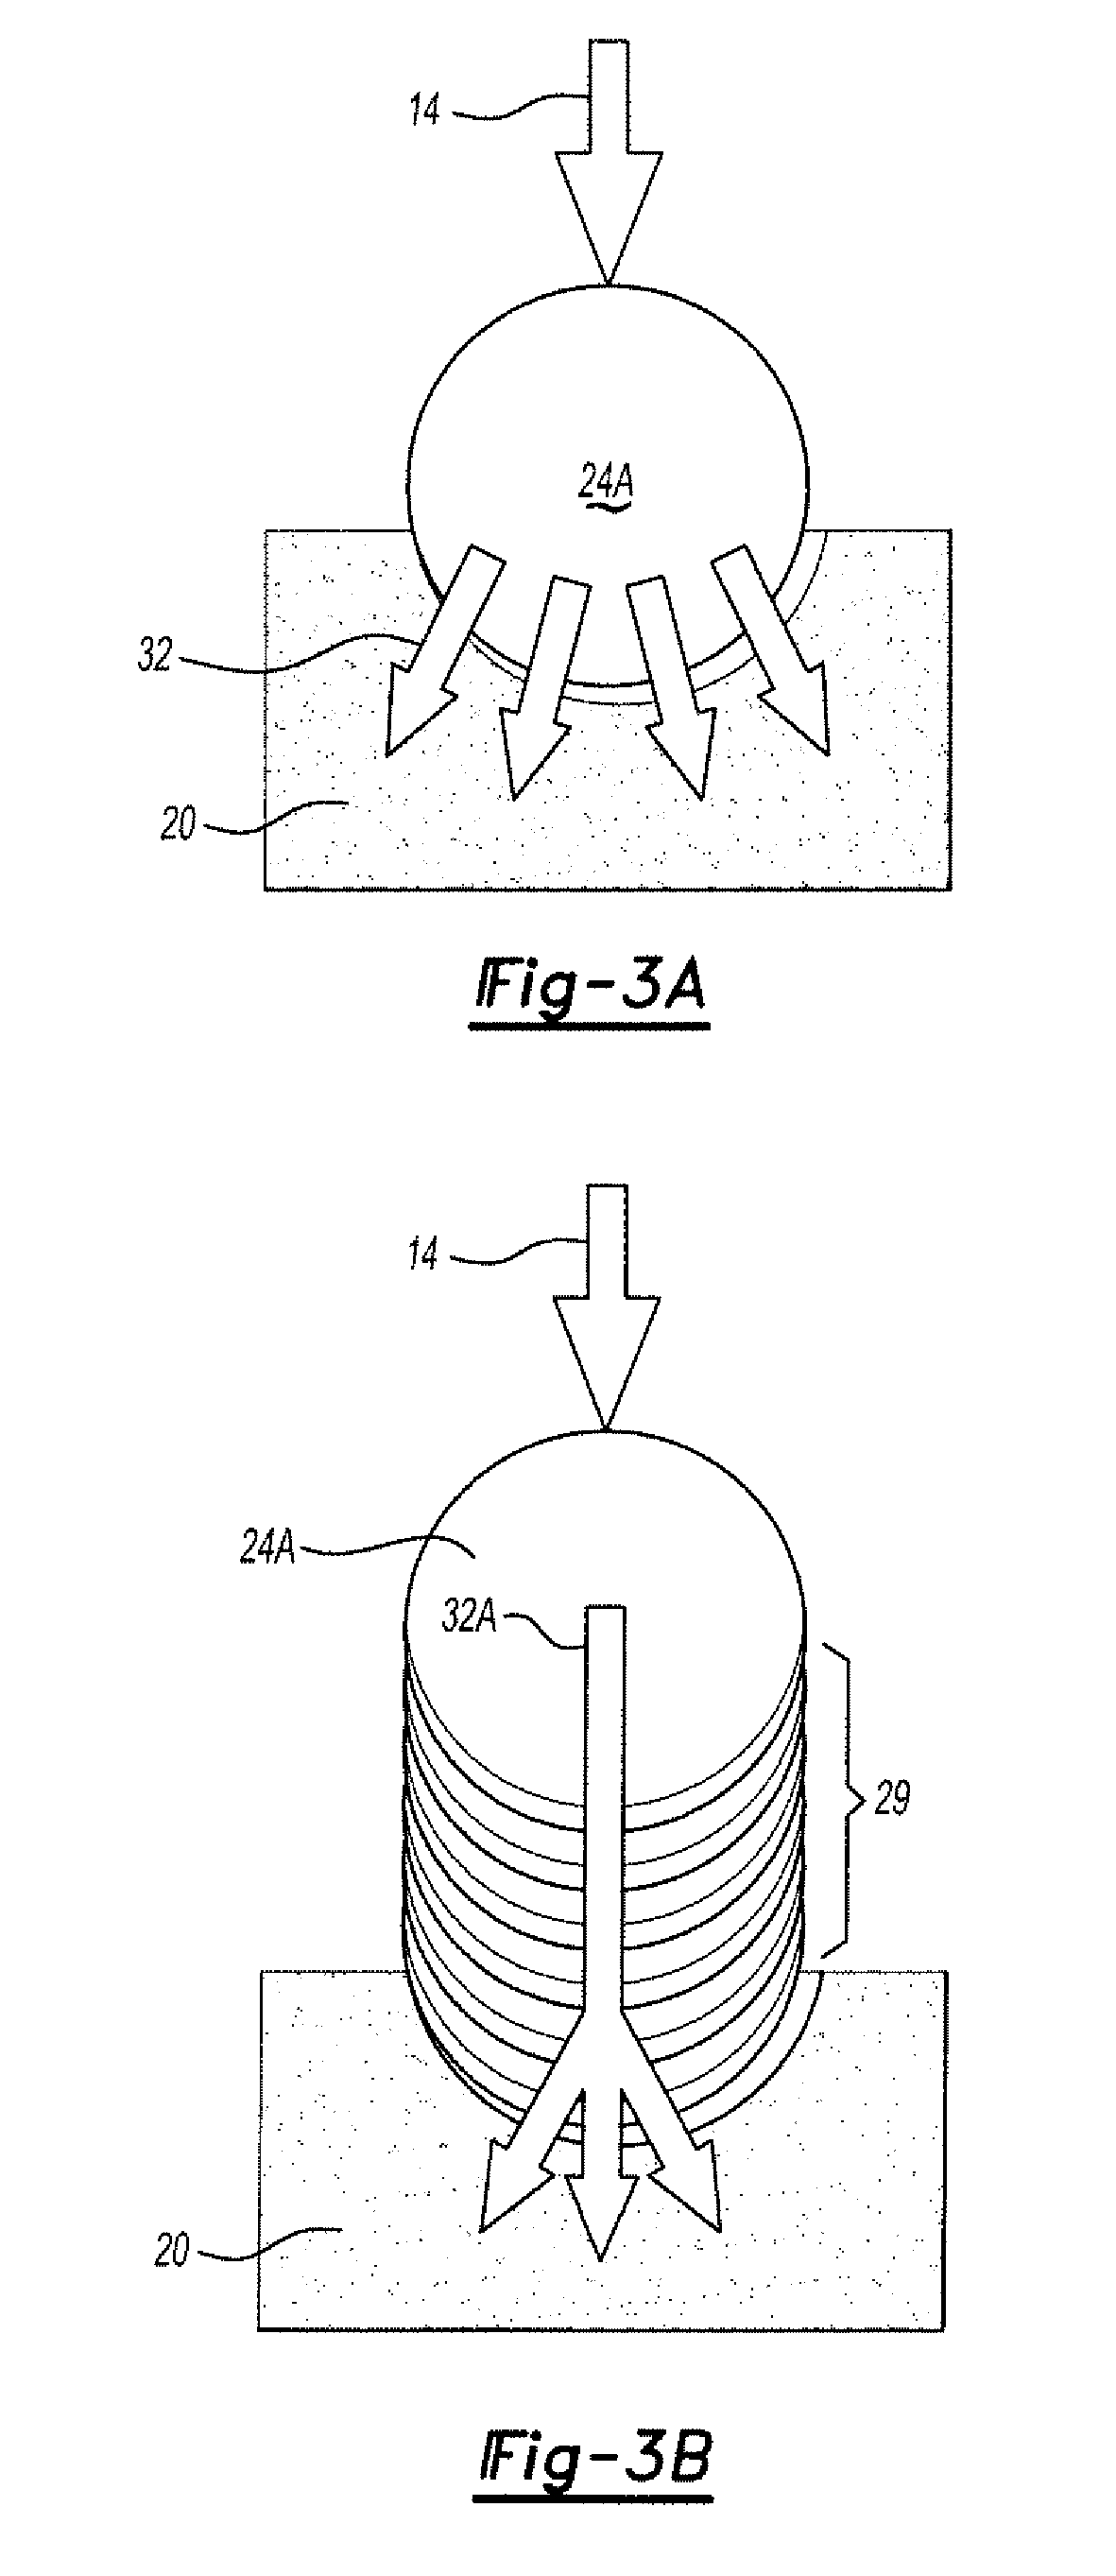 Closed-loop process control for electron beam freeform fabrication and deposition processes